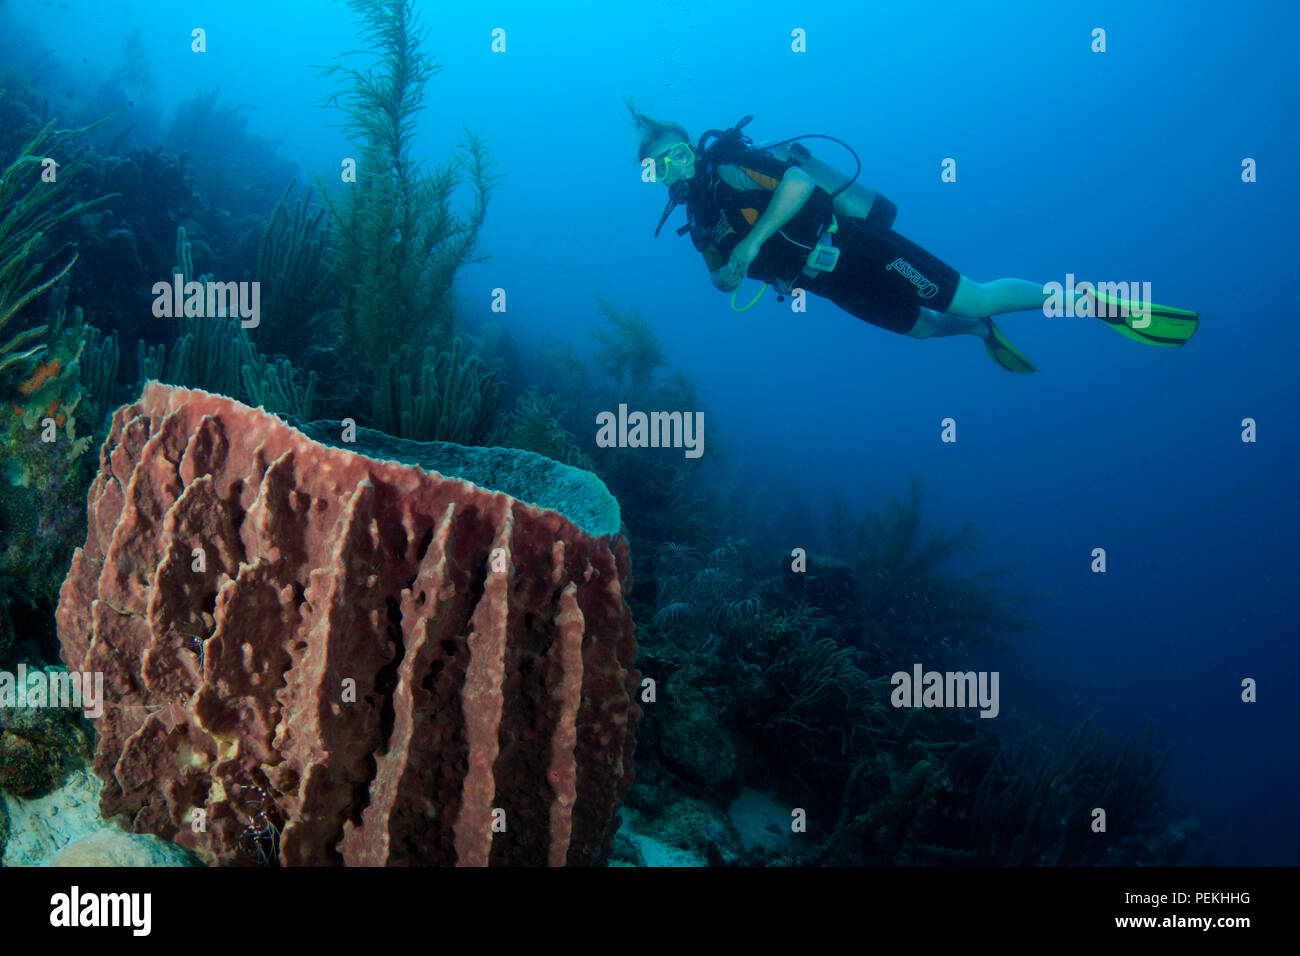 A diver and barrel sponge, on the Sea Aquarium House Reef off the island of Curacao in the Caribbean. Stock Photo